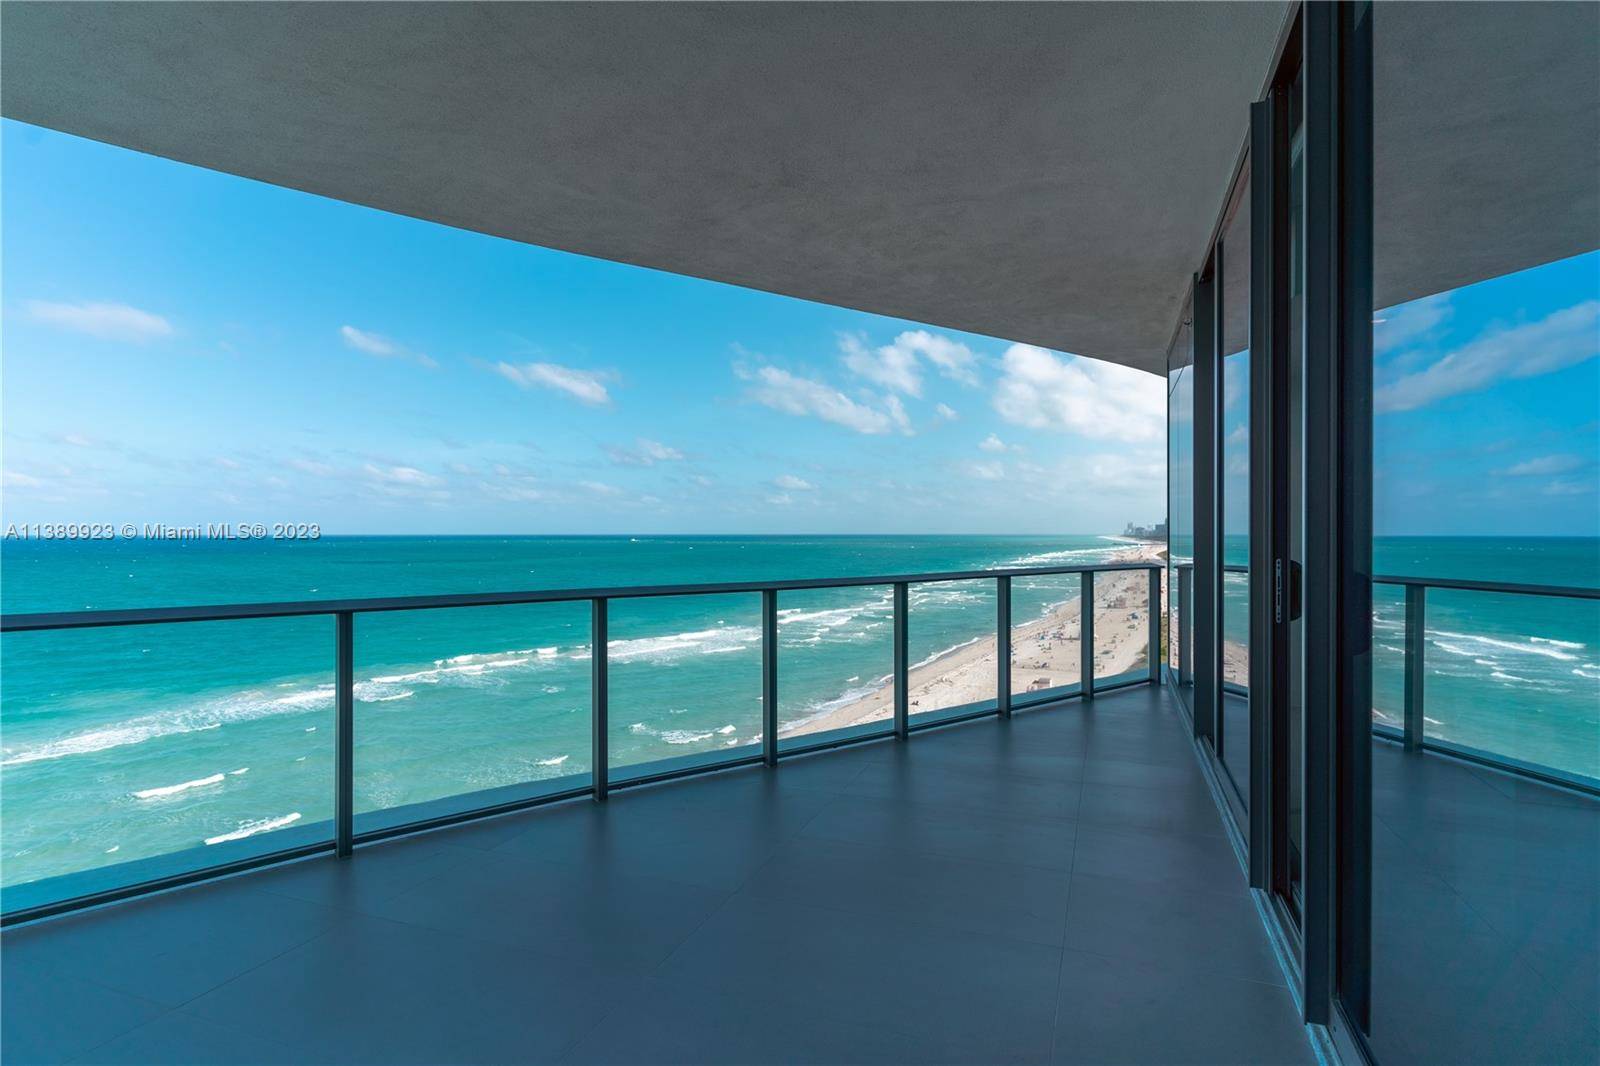 Imagine waking up to the sound of waves crashing on the shore, you are living the dream in this luxury beachfront condo at the Ritz Carlton Residences in Sunny Isles ...